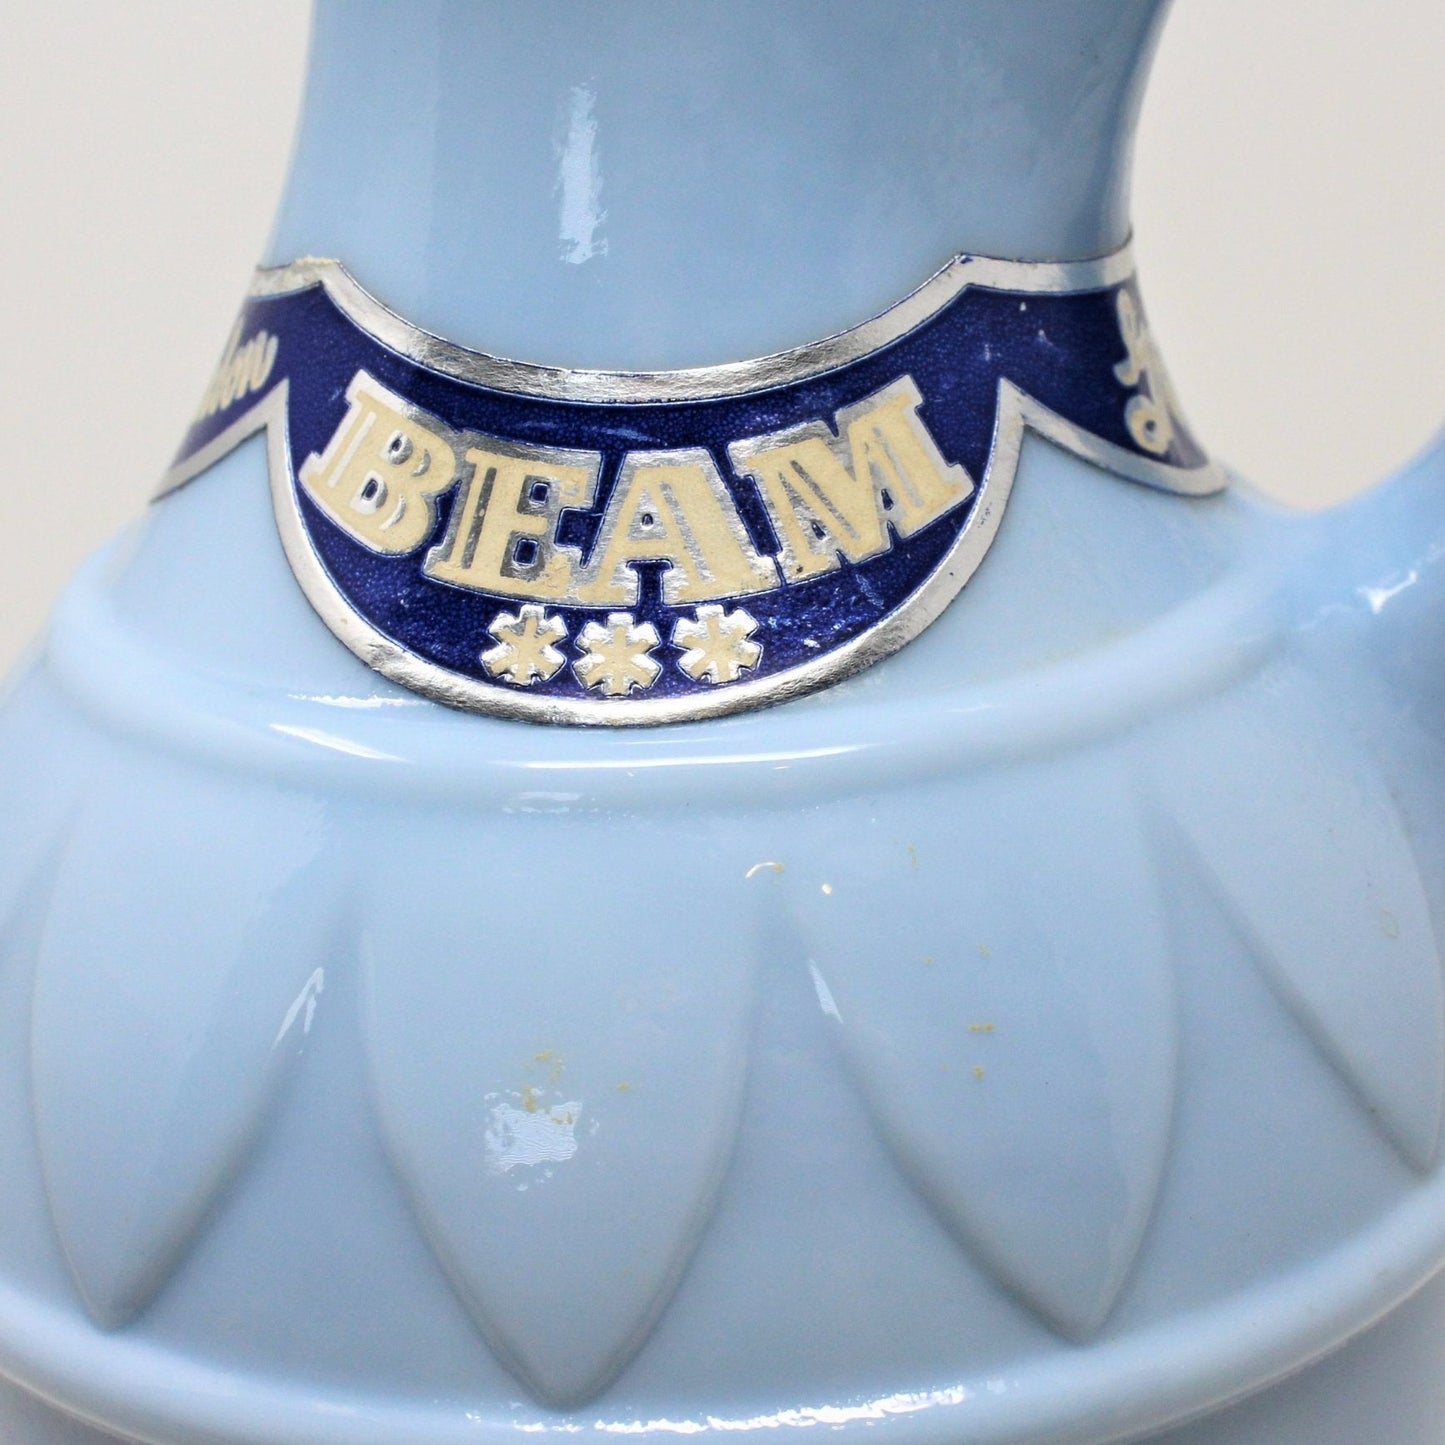 Decanter with Stopper, Jim Beam, Grecian,  Blue Glass, Vintage